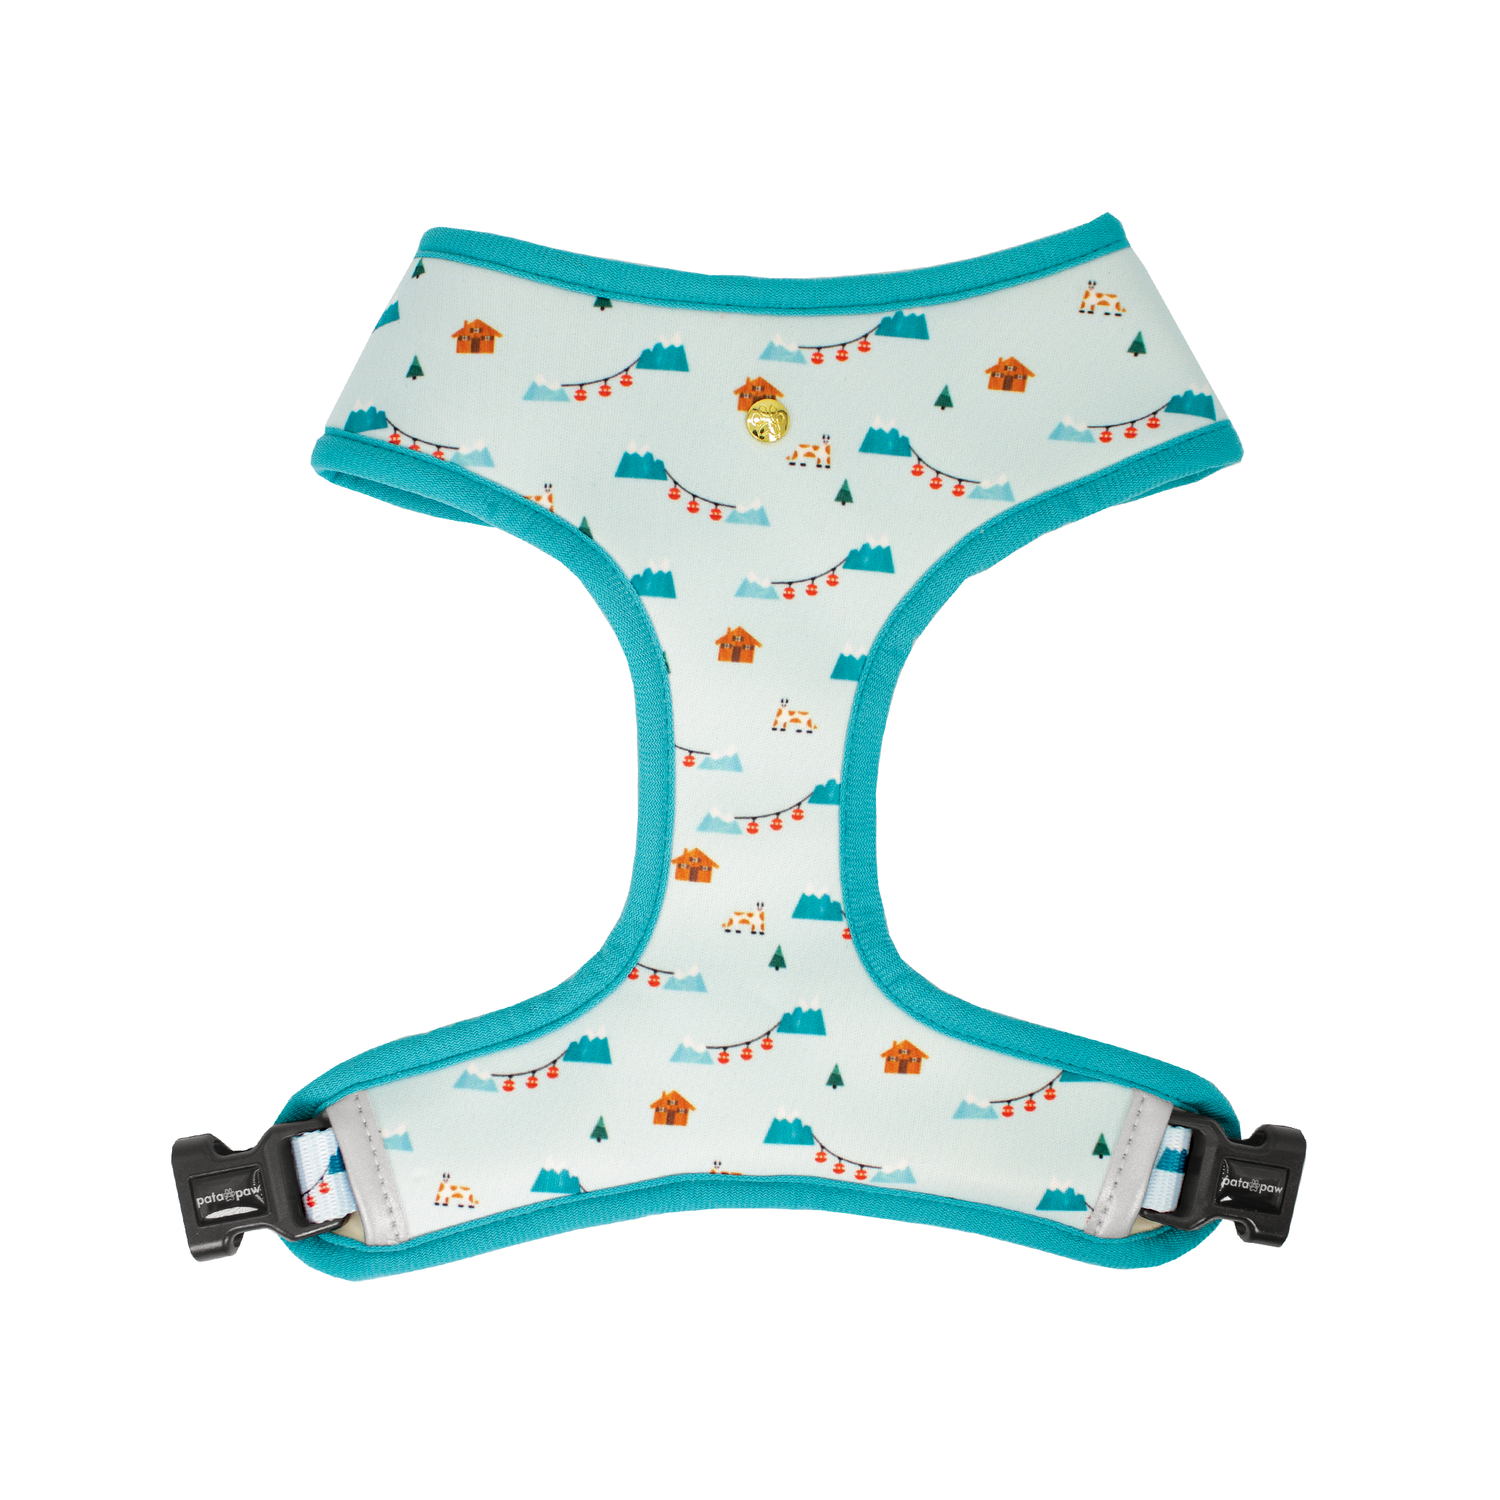 Pata Paw Les Alpes reversible harness showing its pattern.